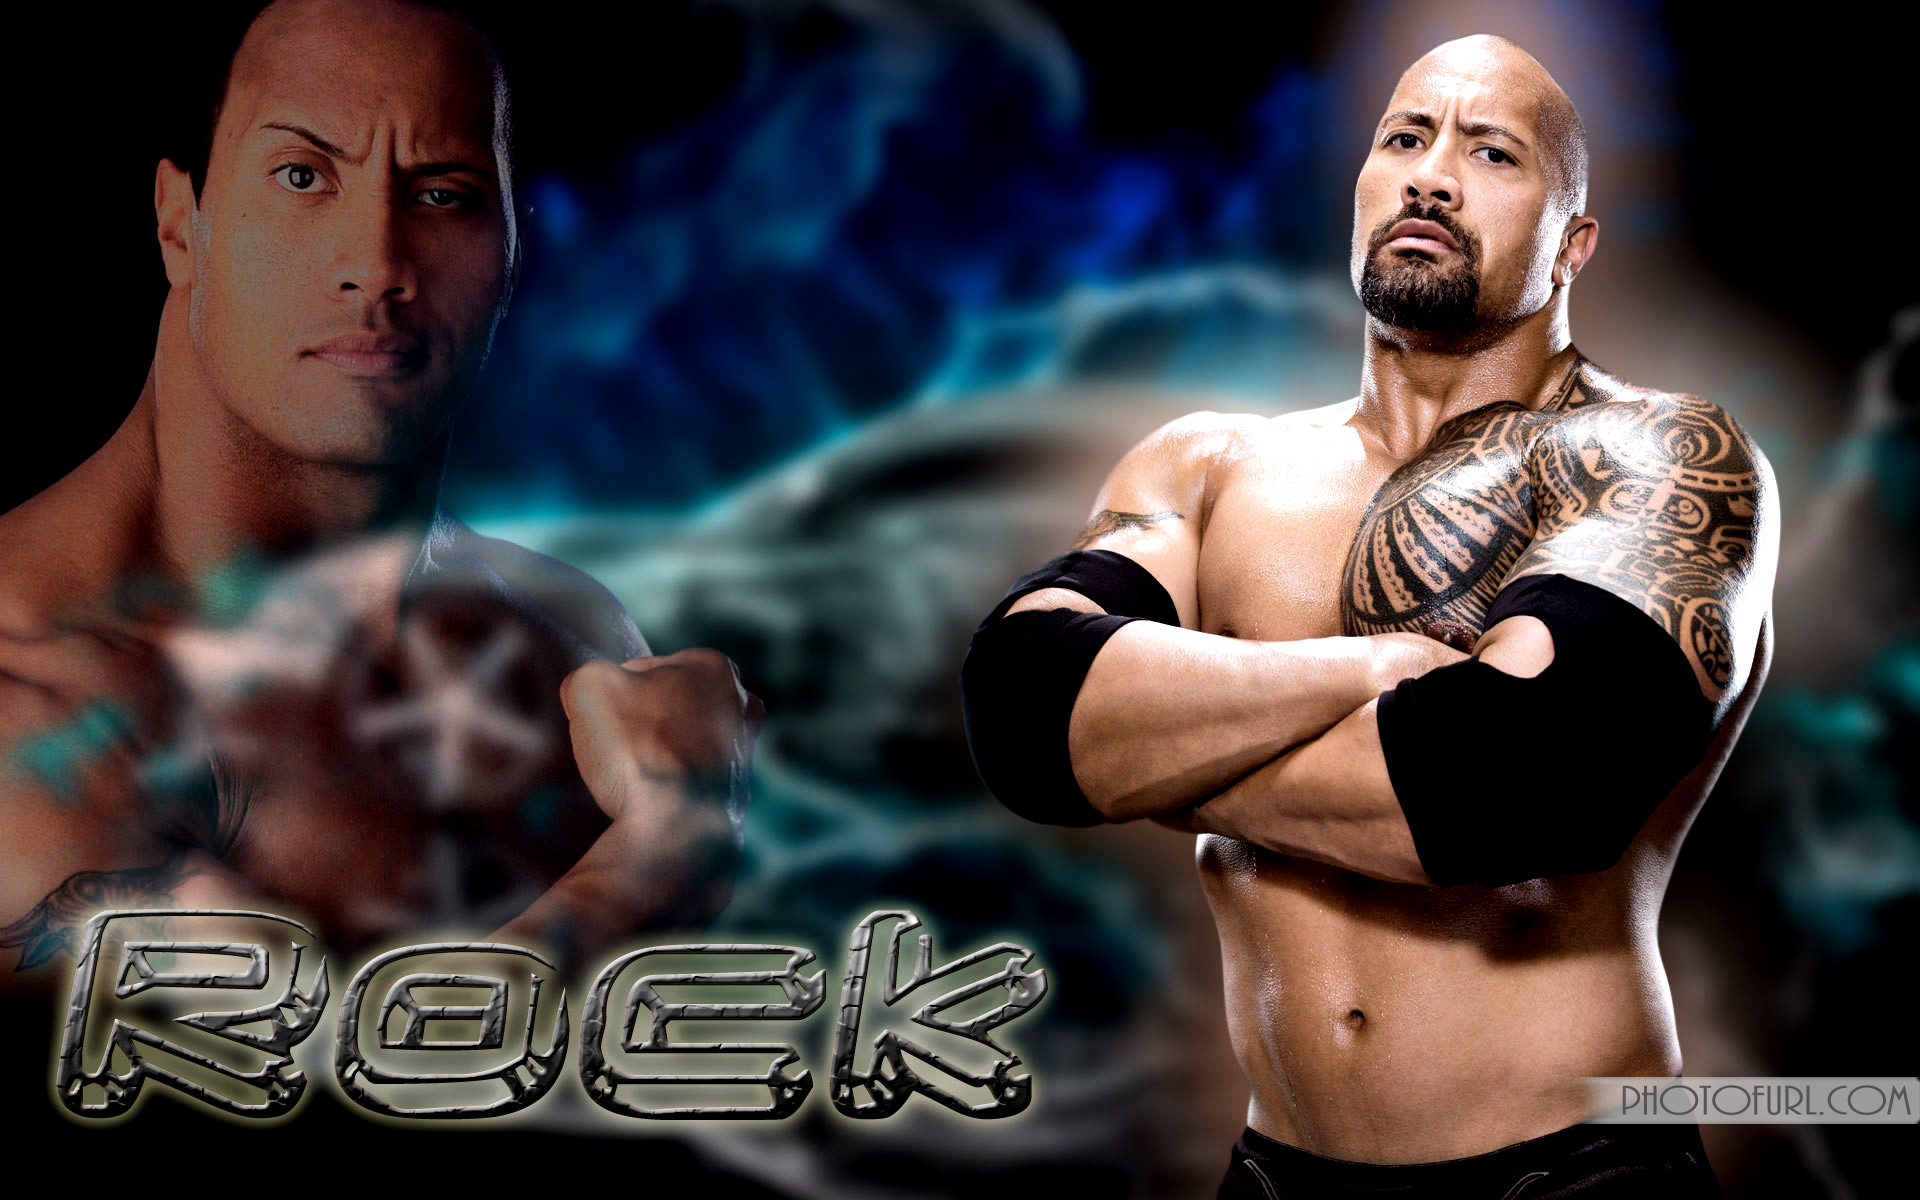 Wwe Wrestling Wallpapers 2013 For Desktop Backgrounds - Rock Boots To Asses - HD Wallpaper 